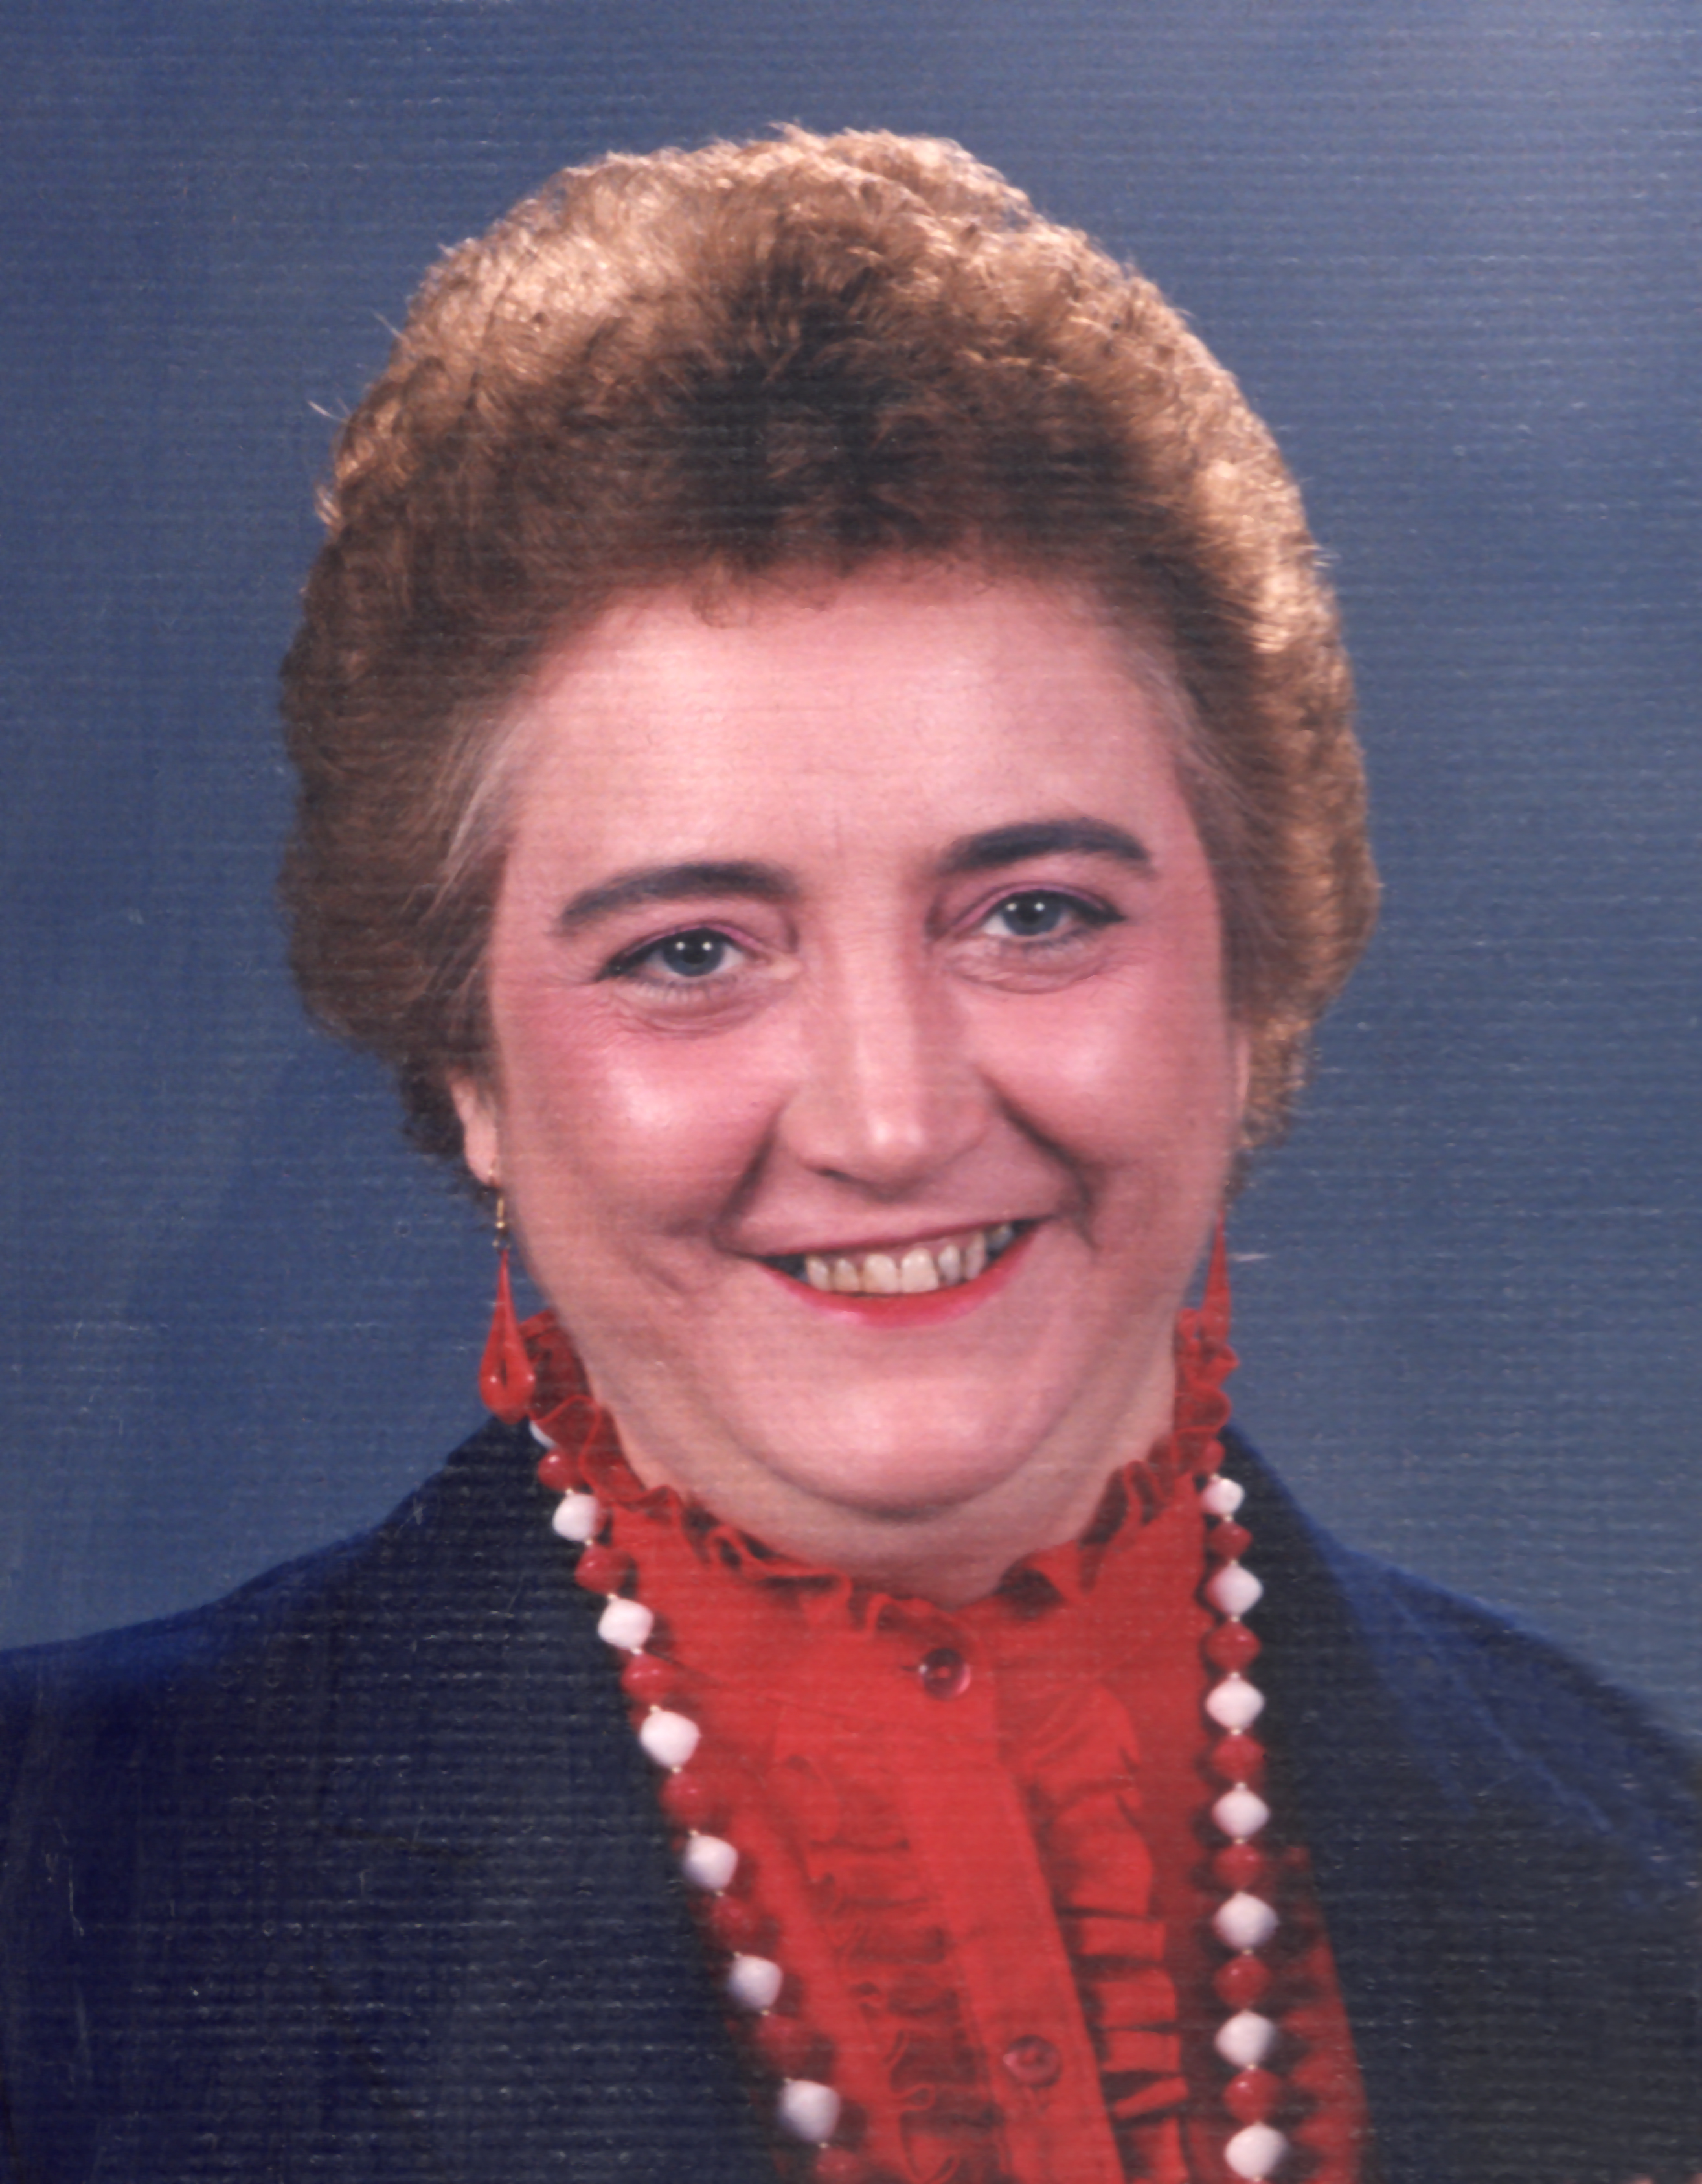 Ruth Ann Stayton Jenkins, age 63, of Campbellsville died Saturday May, 24 2014 at Taylor Regional Hospital in Campbellsville. - jenkins-ruth-ann-cropped